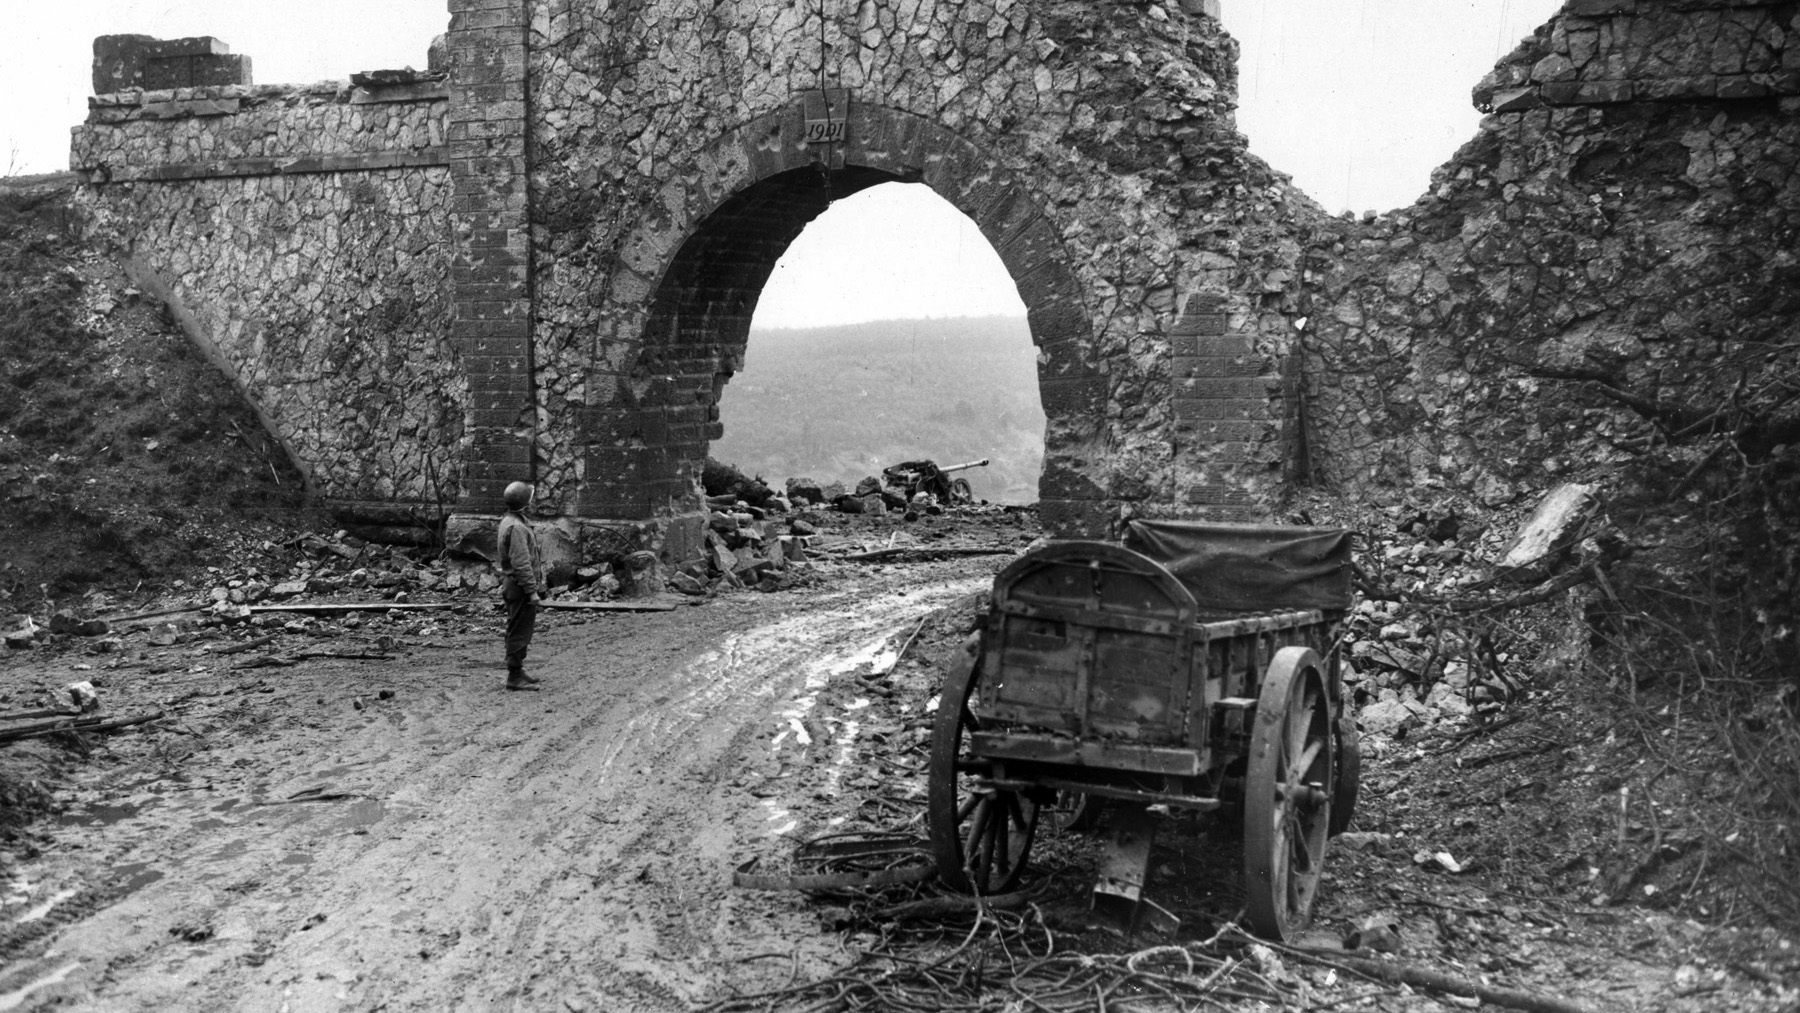 The battered entrance to Fort Driant after its capture.